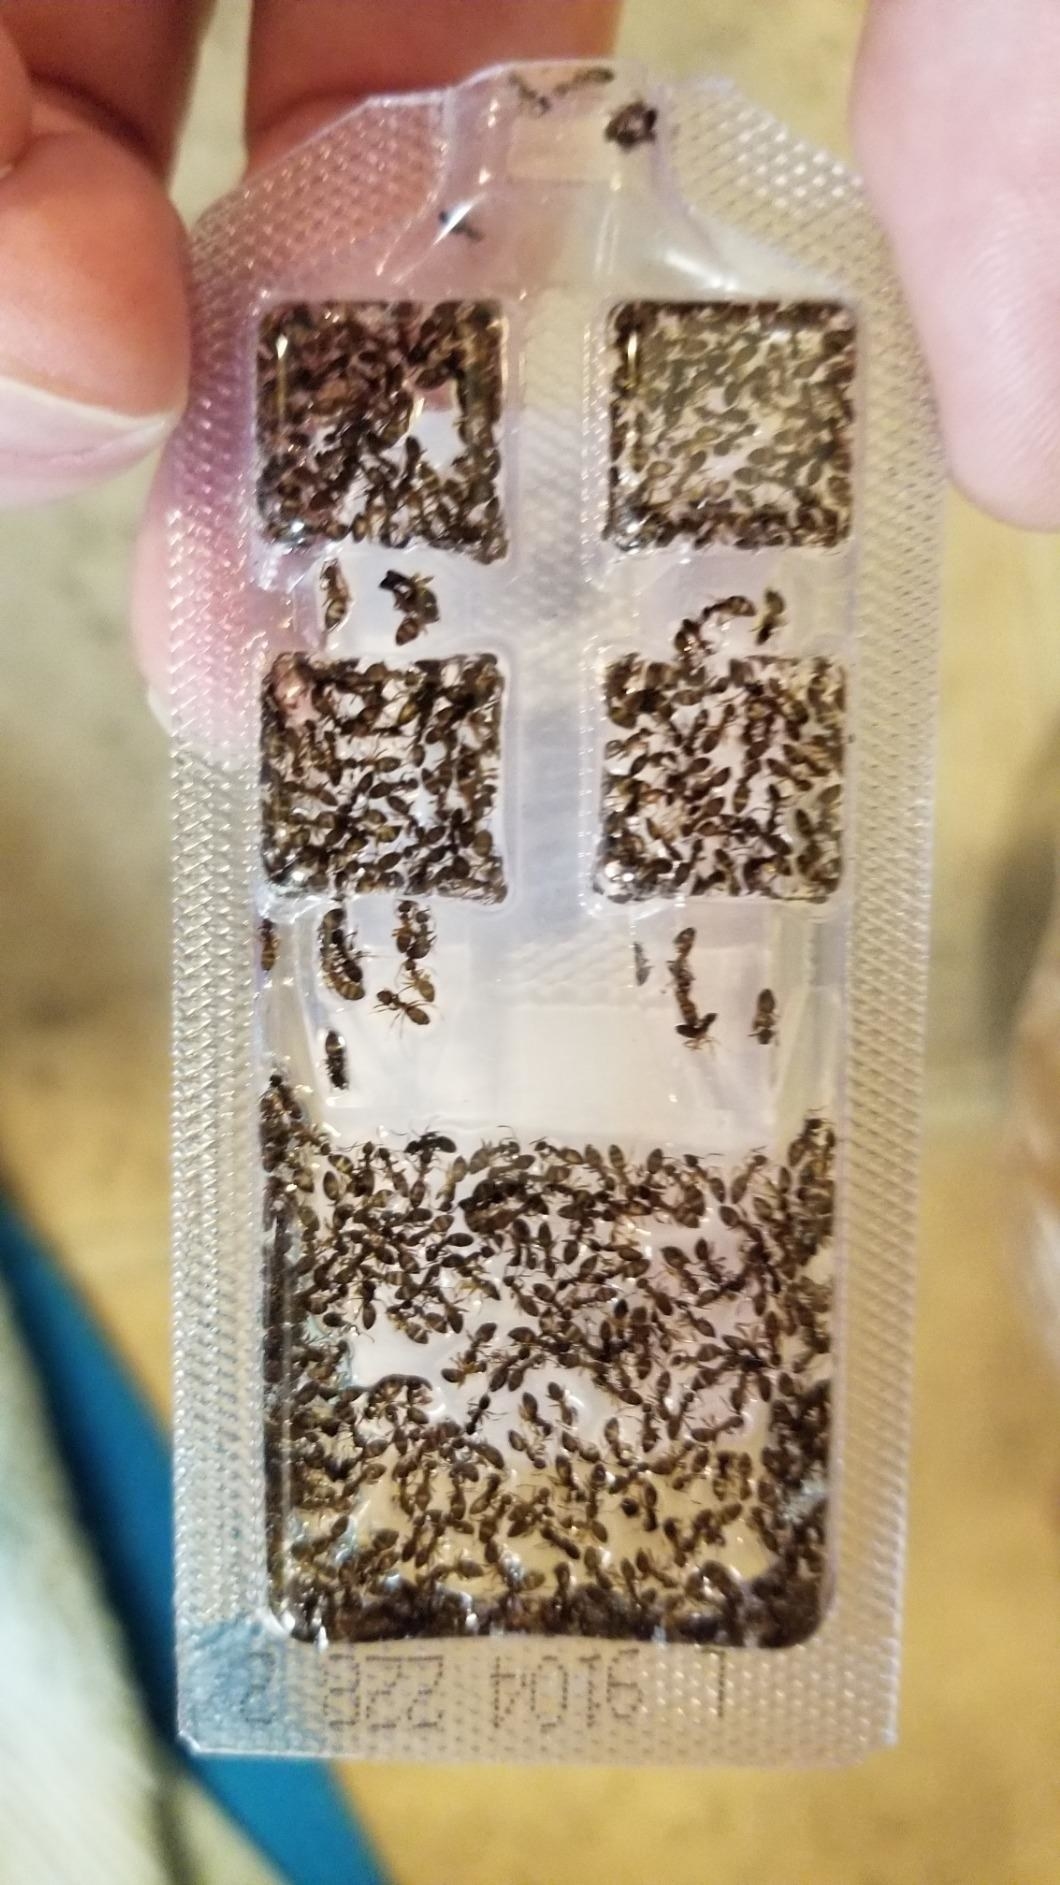 Reviewer pic of a bait trap filled with ants